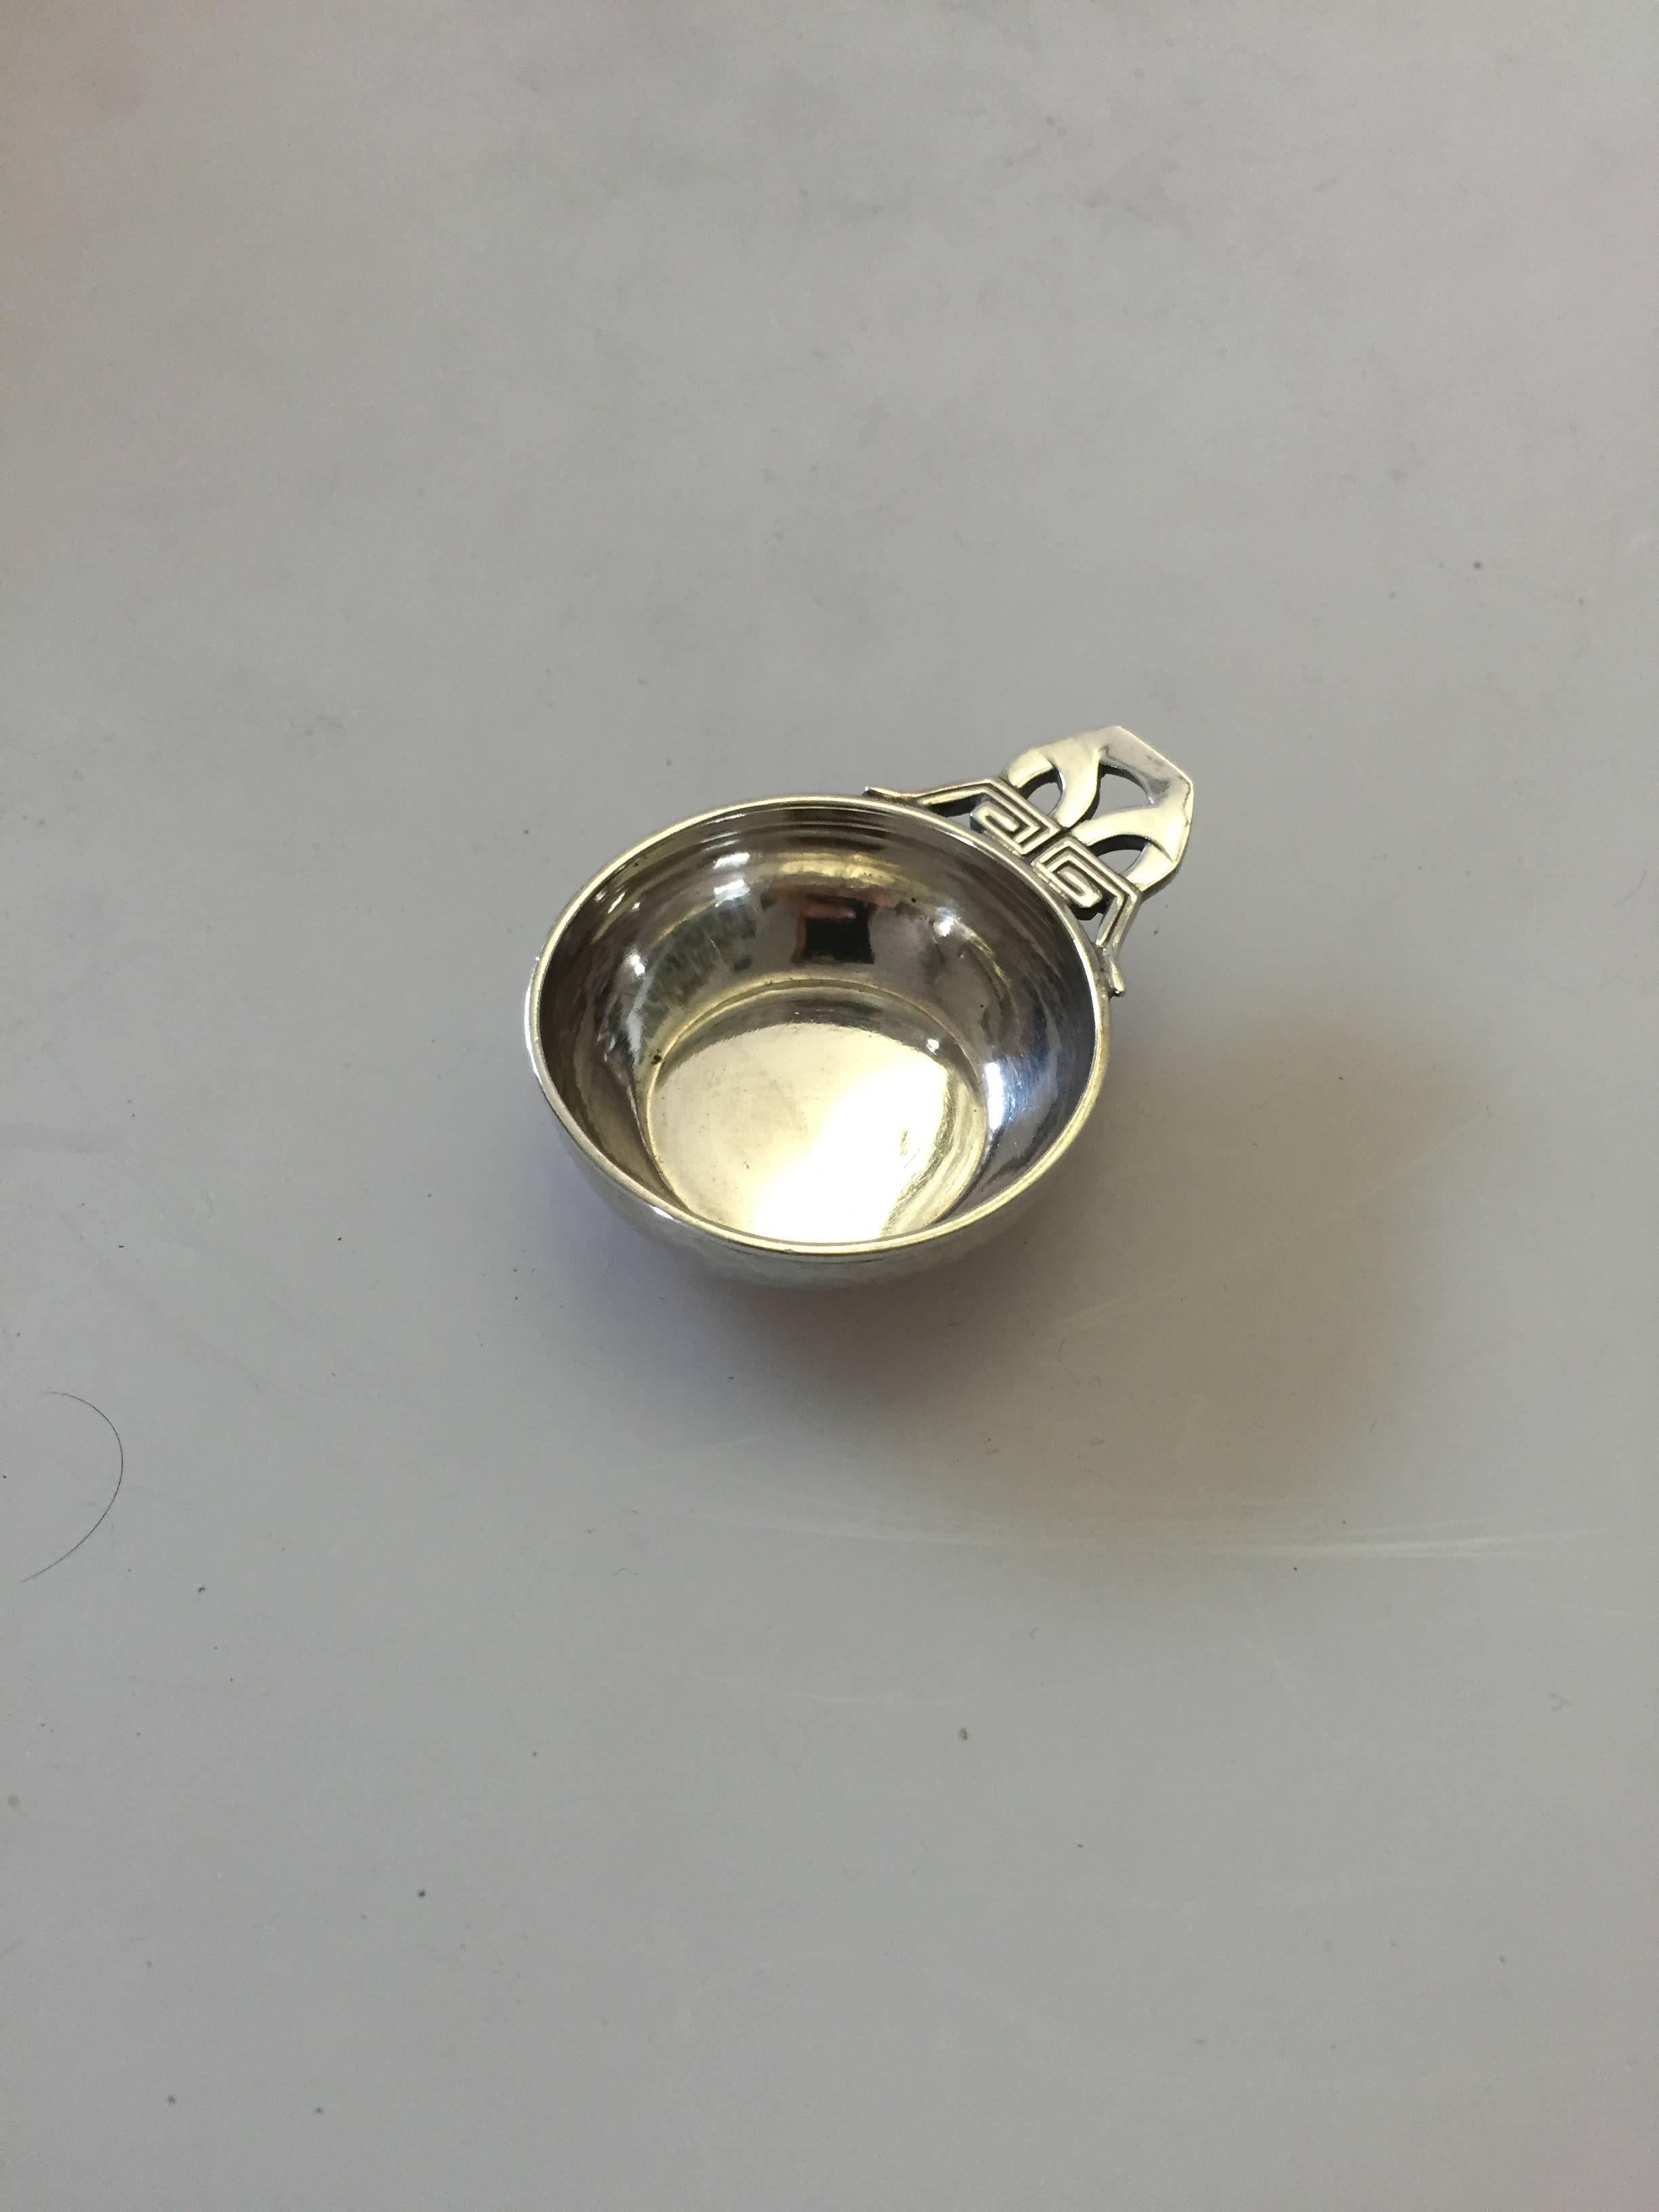 Georg Jensen sterling silver salt dish #402. The salt dish measures 5.5 cm and is in a good condition.

Georg Jensen (1866-1935) opened his small silver atelier in Copenhagen, Denmark in 1904. By 1935 the year of his death, he had received world